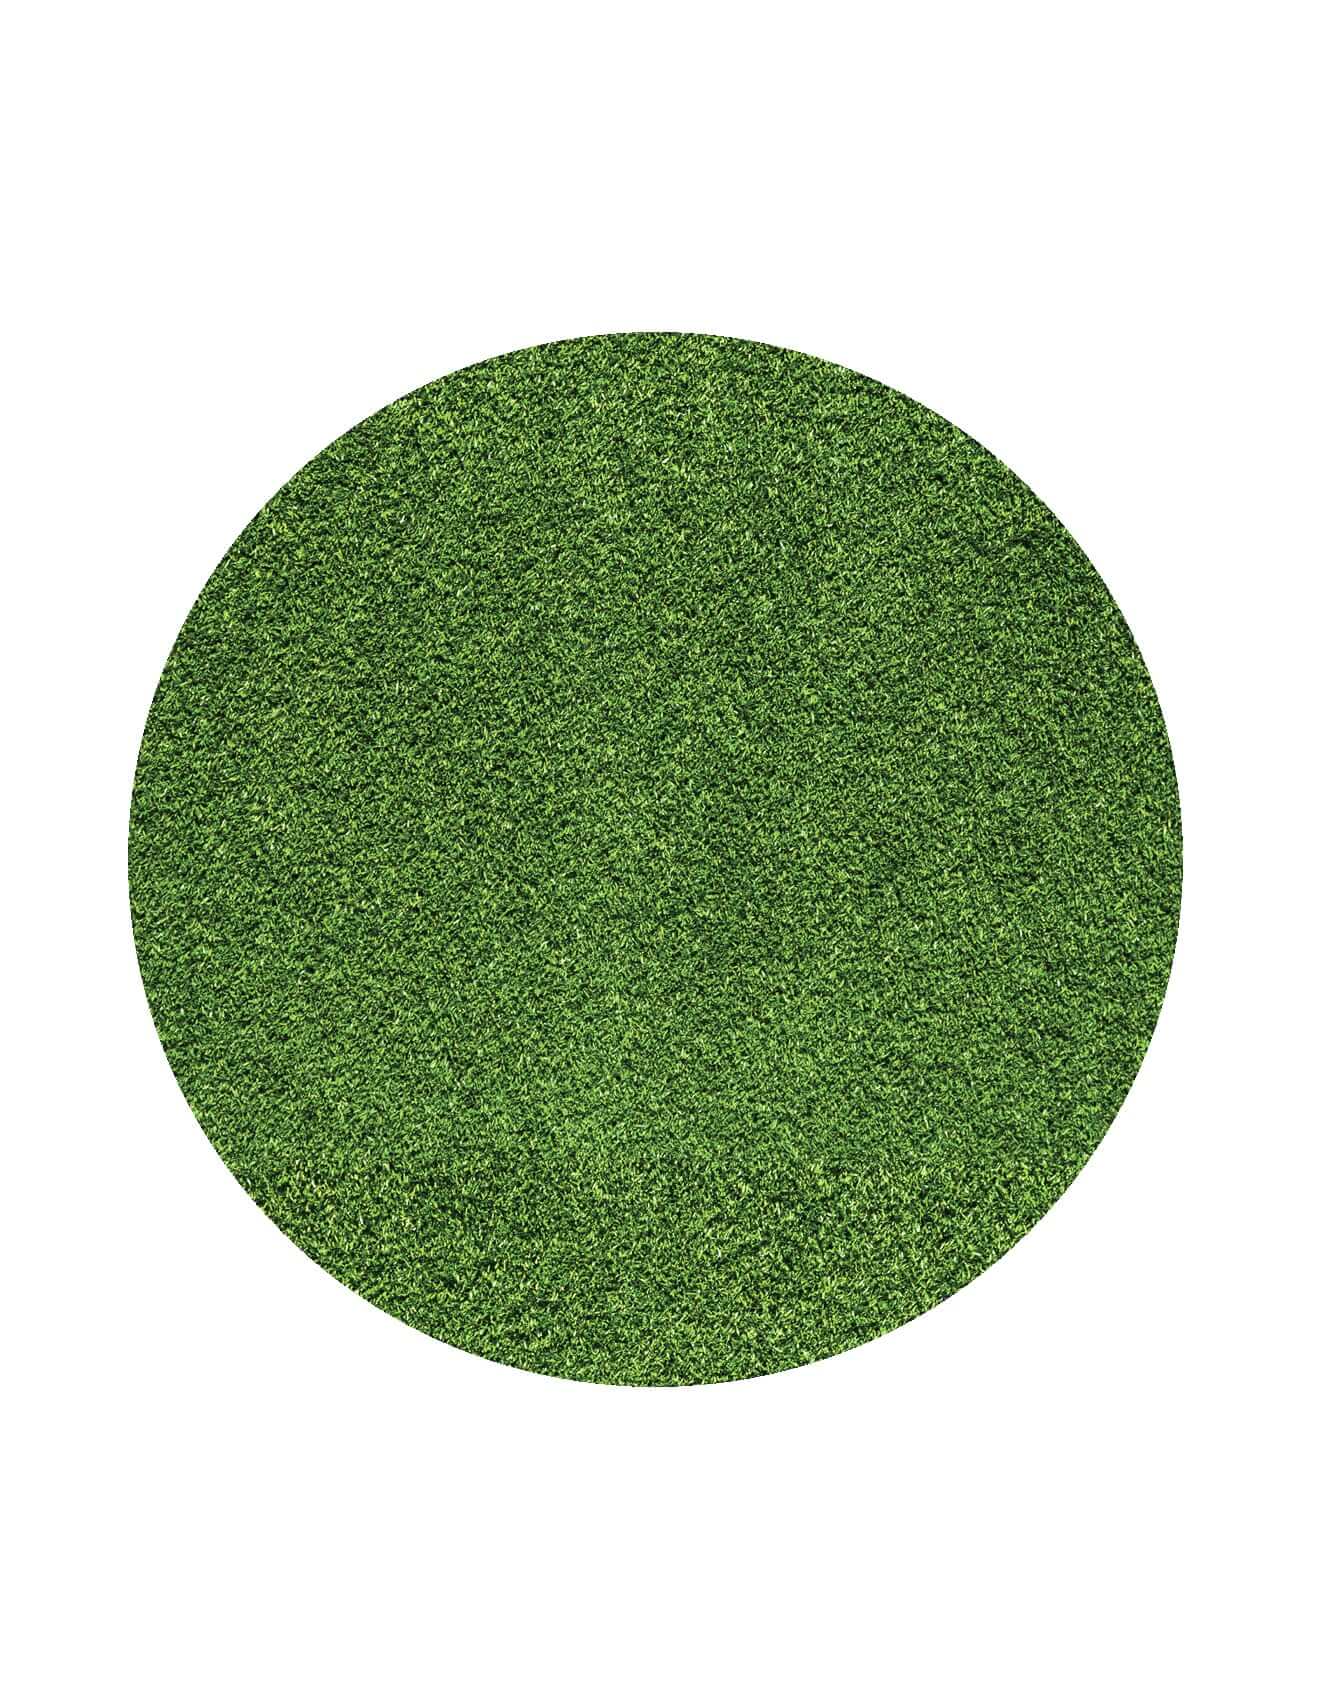 Astro Turf Rug – Assorted Sizes